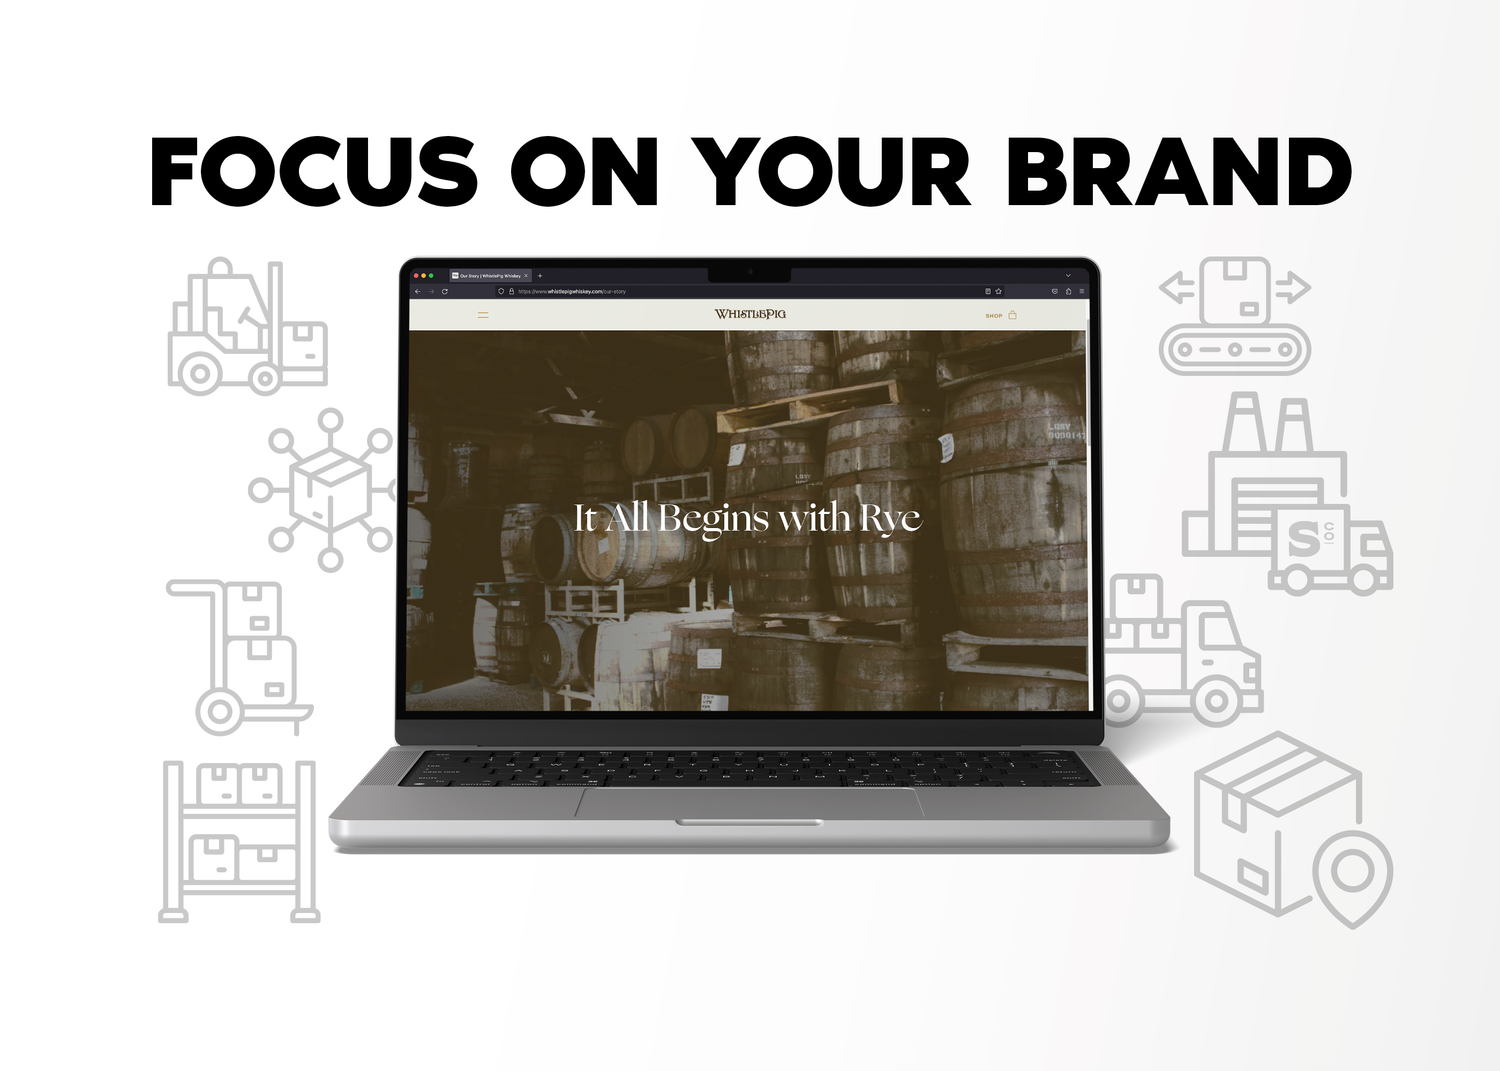 Focus on your brand (image of laptop with website whistlepigwhiskey.com)